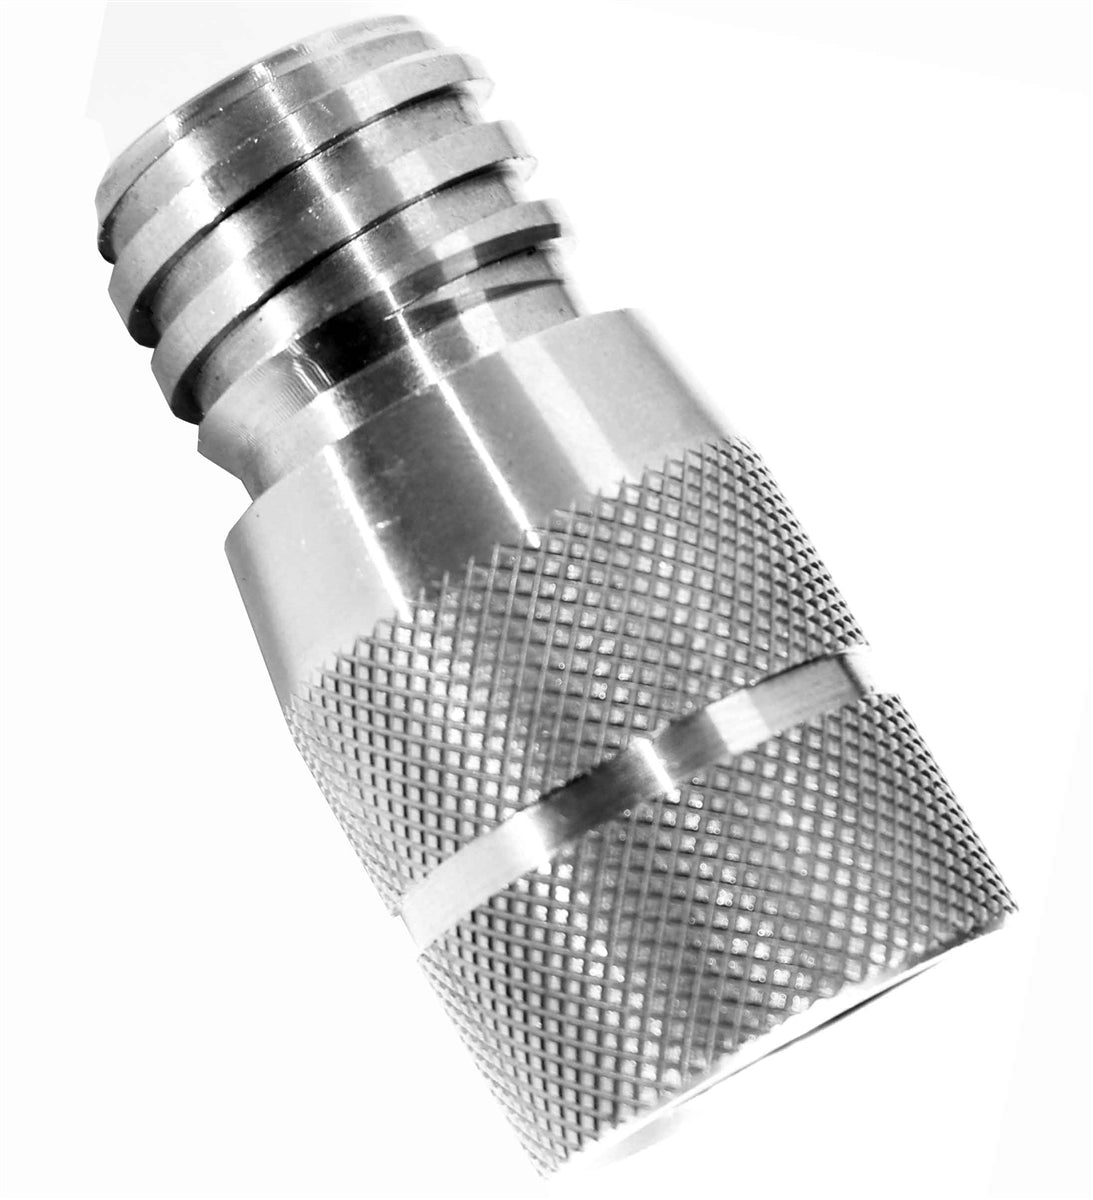 stainless steel adapter for paintball co2 tanks soda machine.